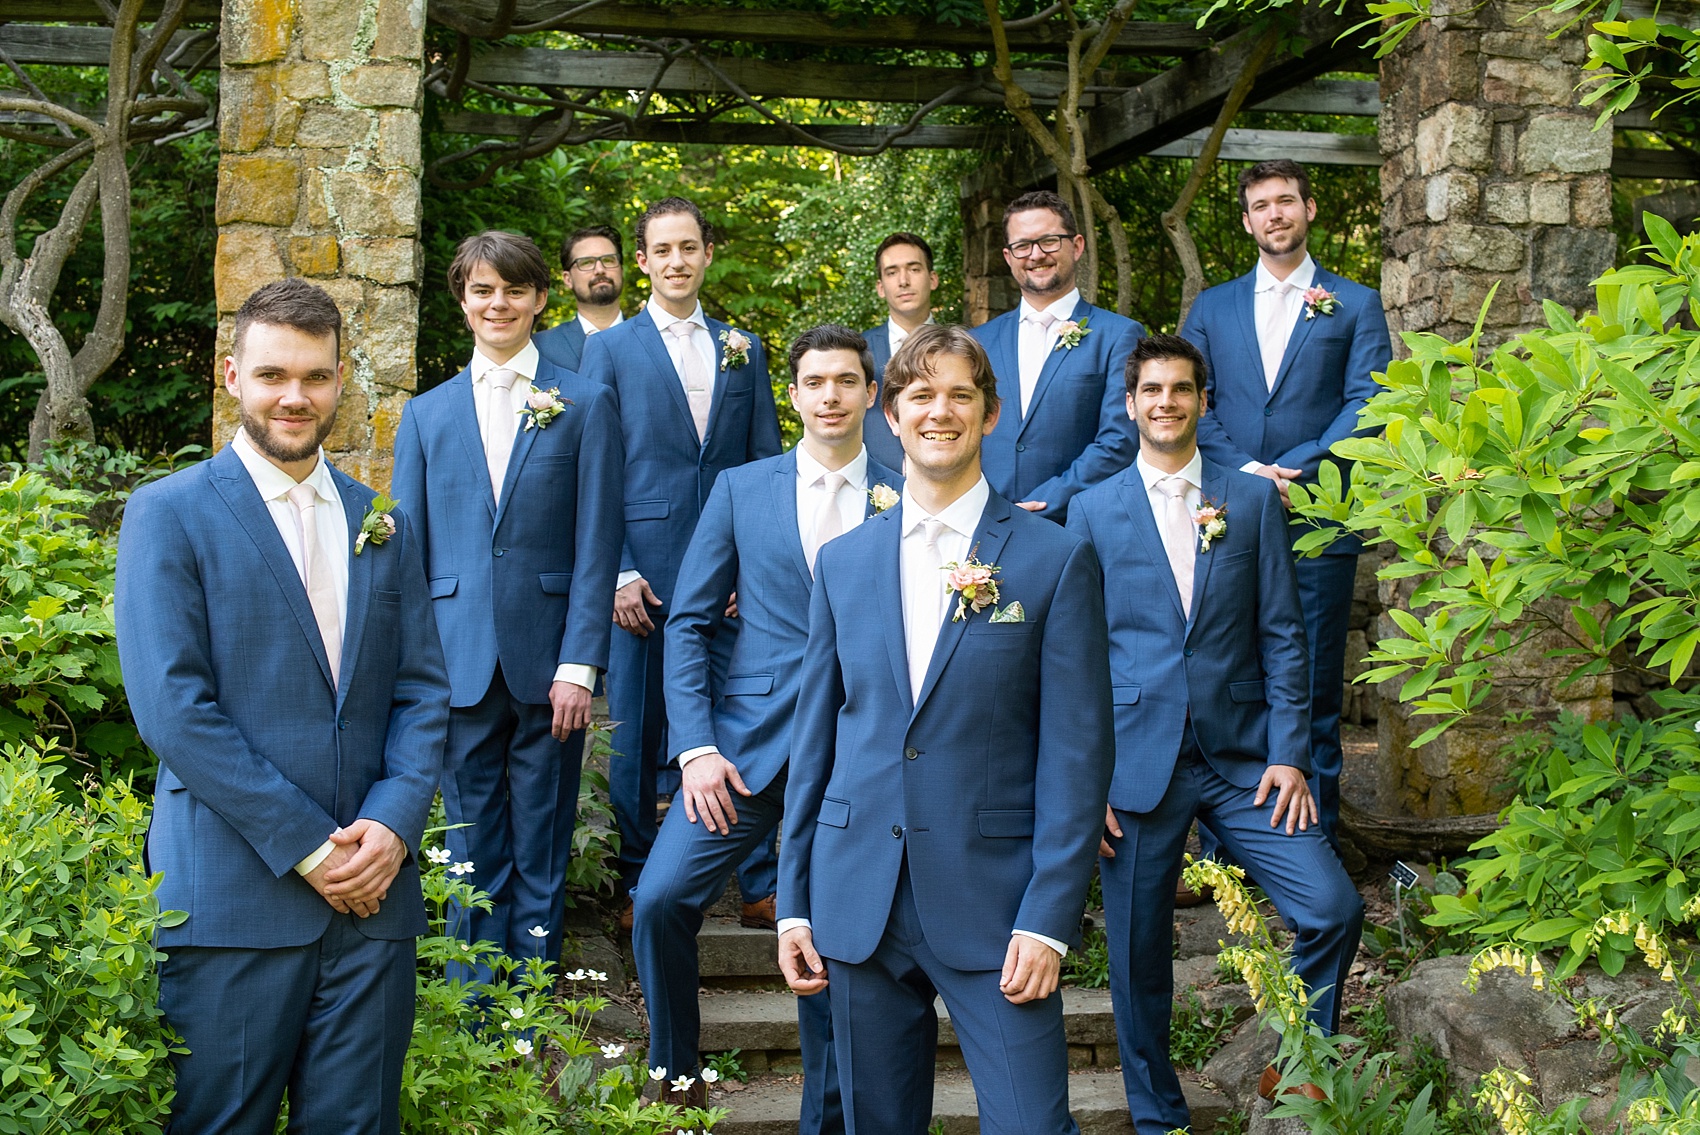 A summer wedding at Olde Mill Inn, NJ. Photos by Mikkel Paige Photography. This New Jersey venue is a great option for an event not too far from NYC. The wedding party photos were at nearby Cross Estate Gardens, a beautiful lush area for bridal party and groomsmen photos. The guys wore blue suits with pink ties. Click through for their complete wedding recap! #OldeMillInn #NJwedding #NJweddingphotographer #mikkelpaige #NewJerseyWeddingVenue #NewJerseyWedding #CrossEstateGardens #weddingdetails #bridalparty #bluesuits #groomsmen